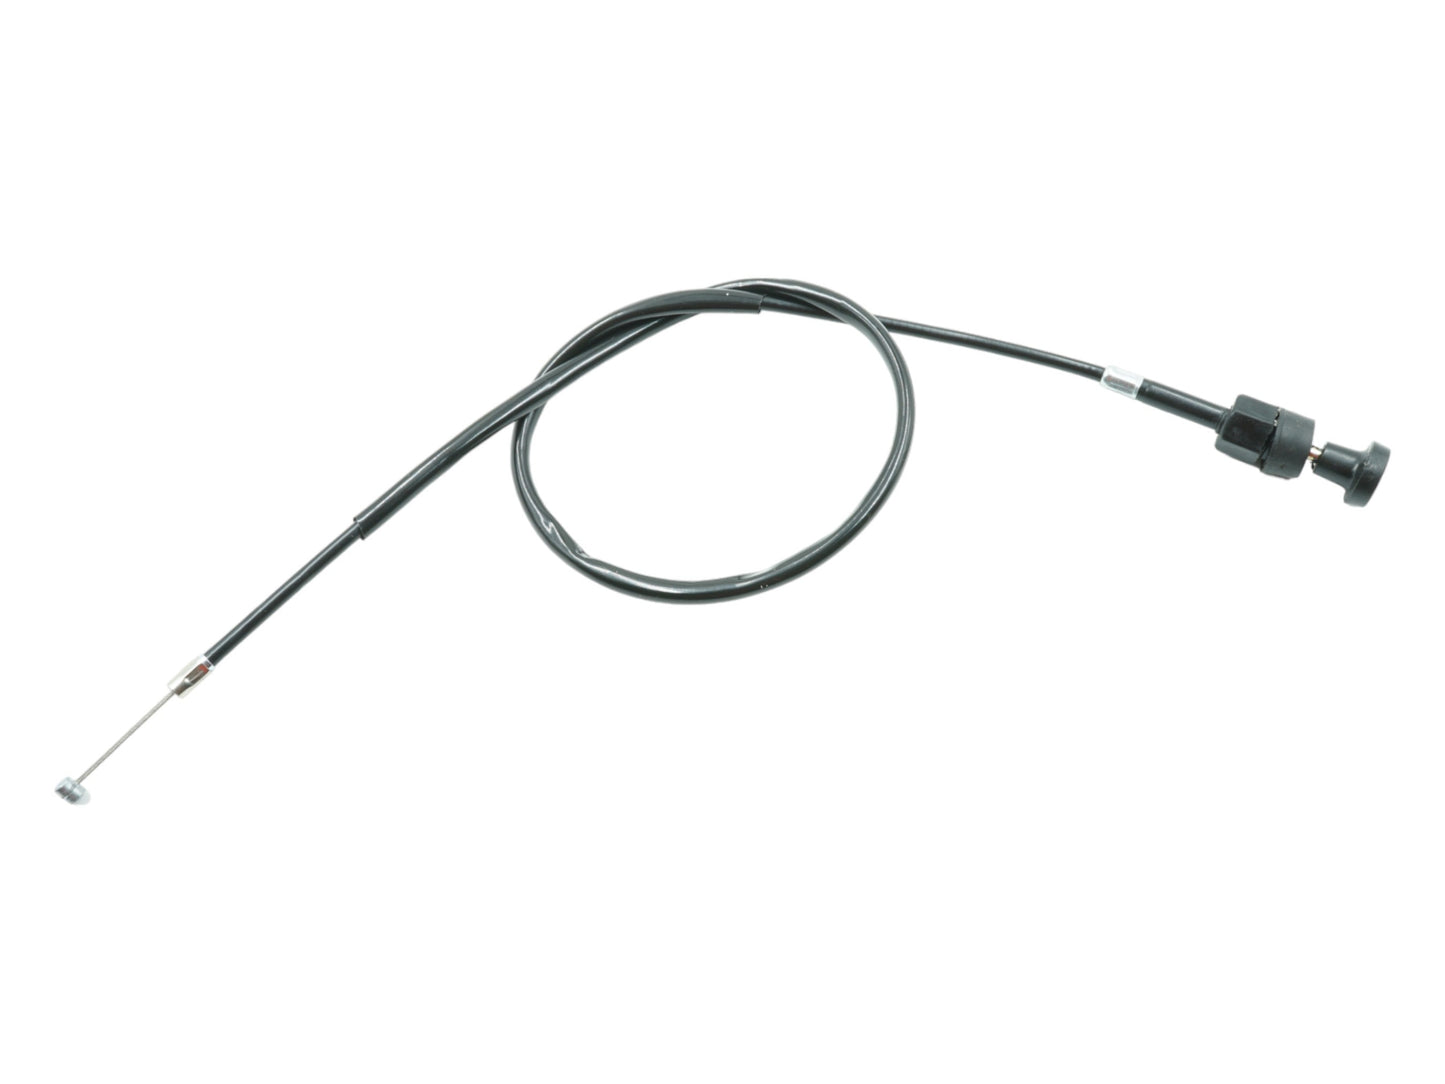 Replacement Choke Cable for Honda ATC125M and ATC200 17950-H